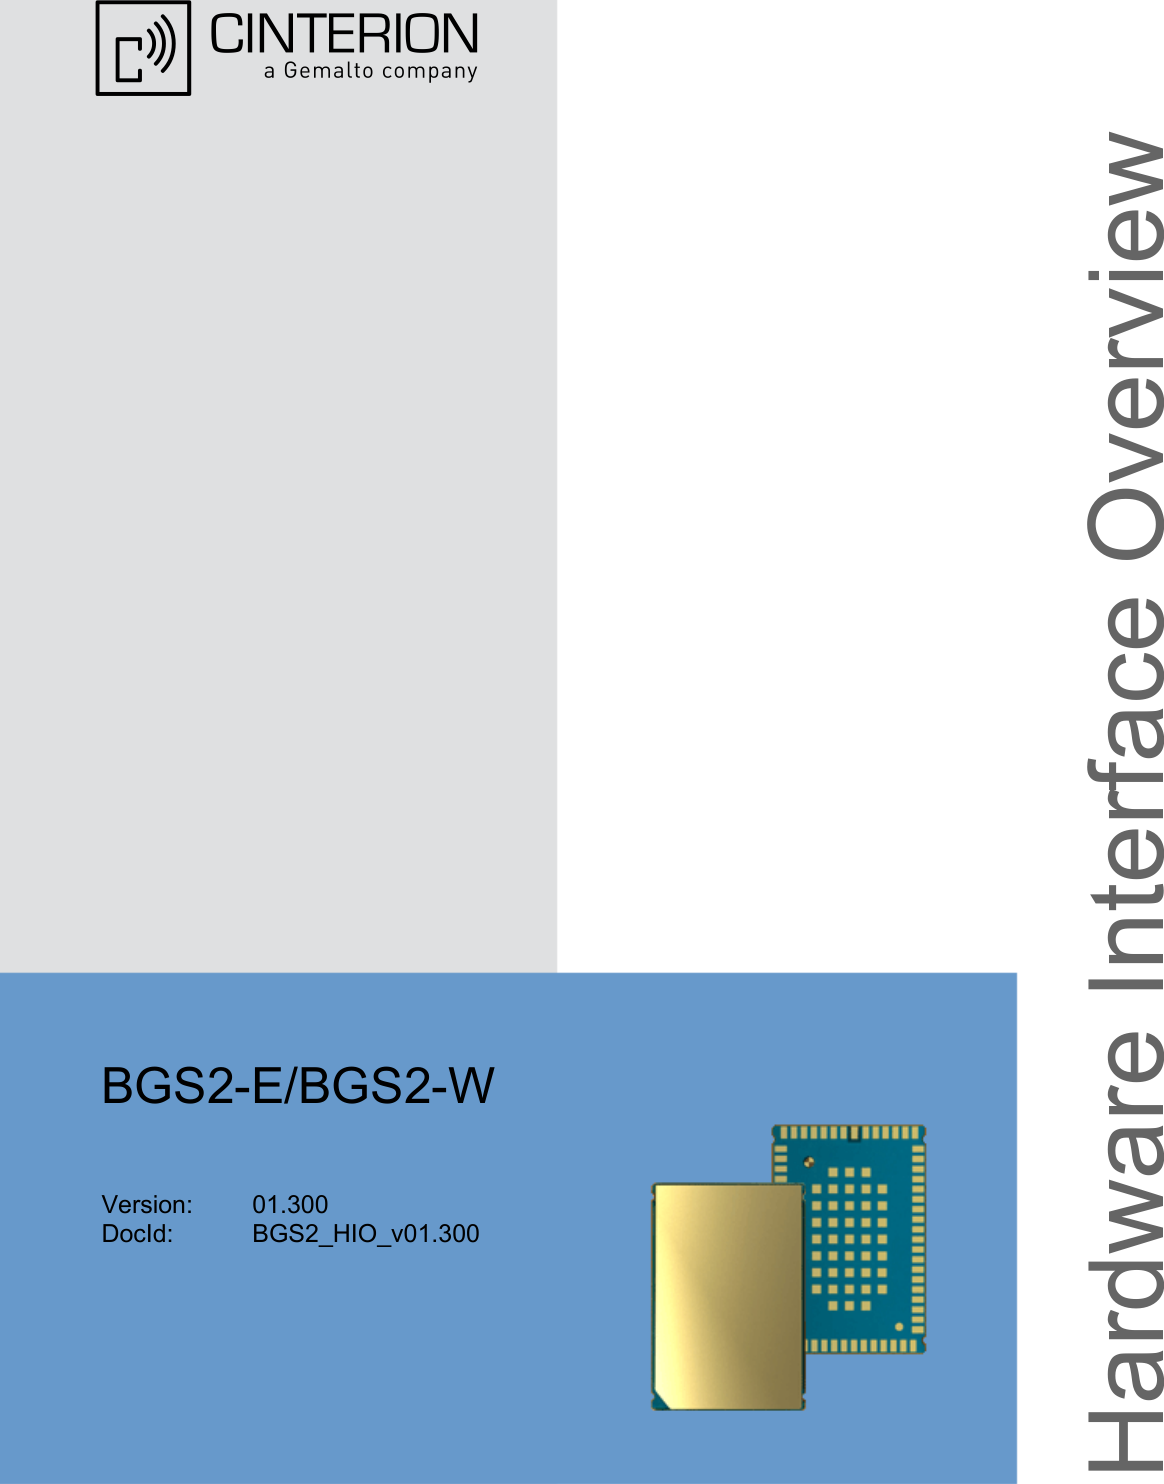 BGS2-E/BGS2-WVersion: 01.300DocId: BGS2_HIO_v01.300Hardware Interface Overview